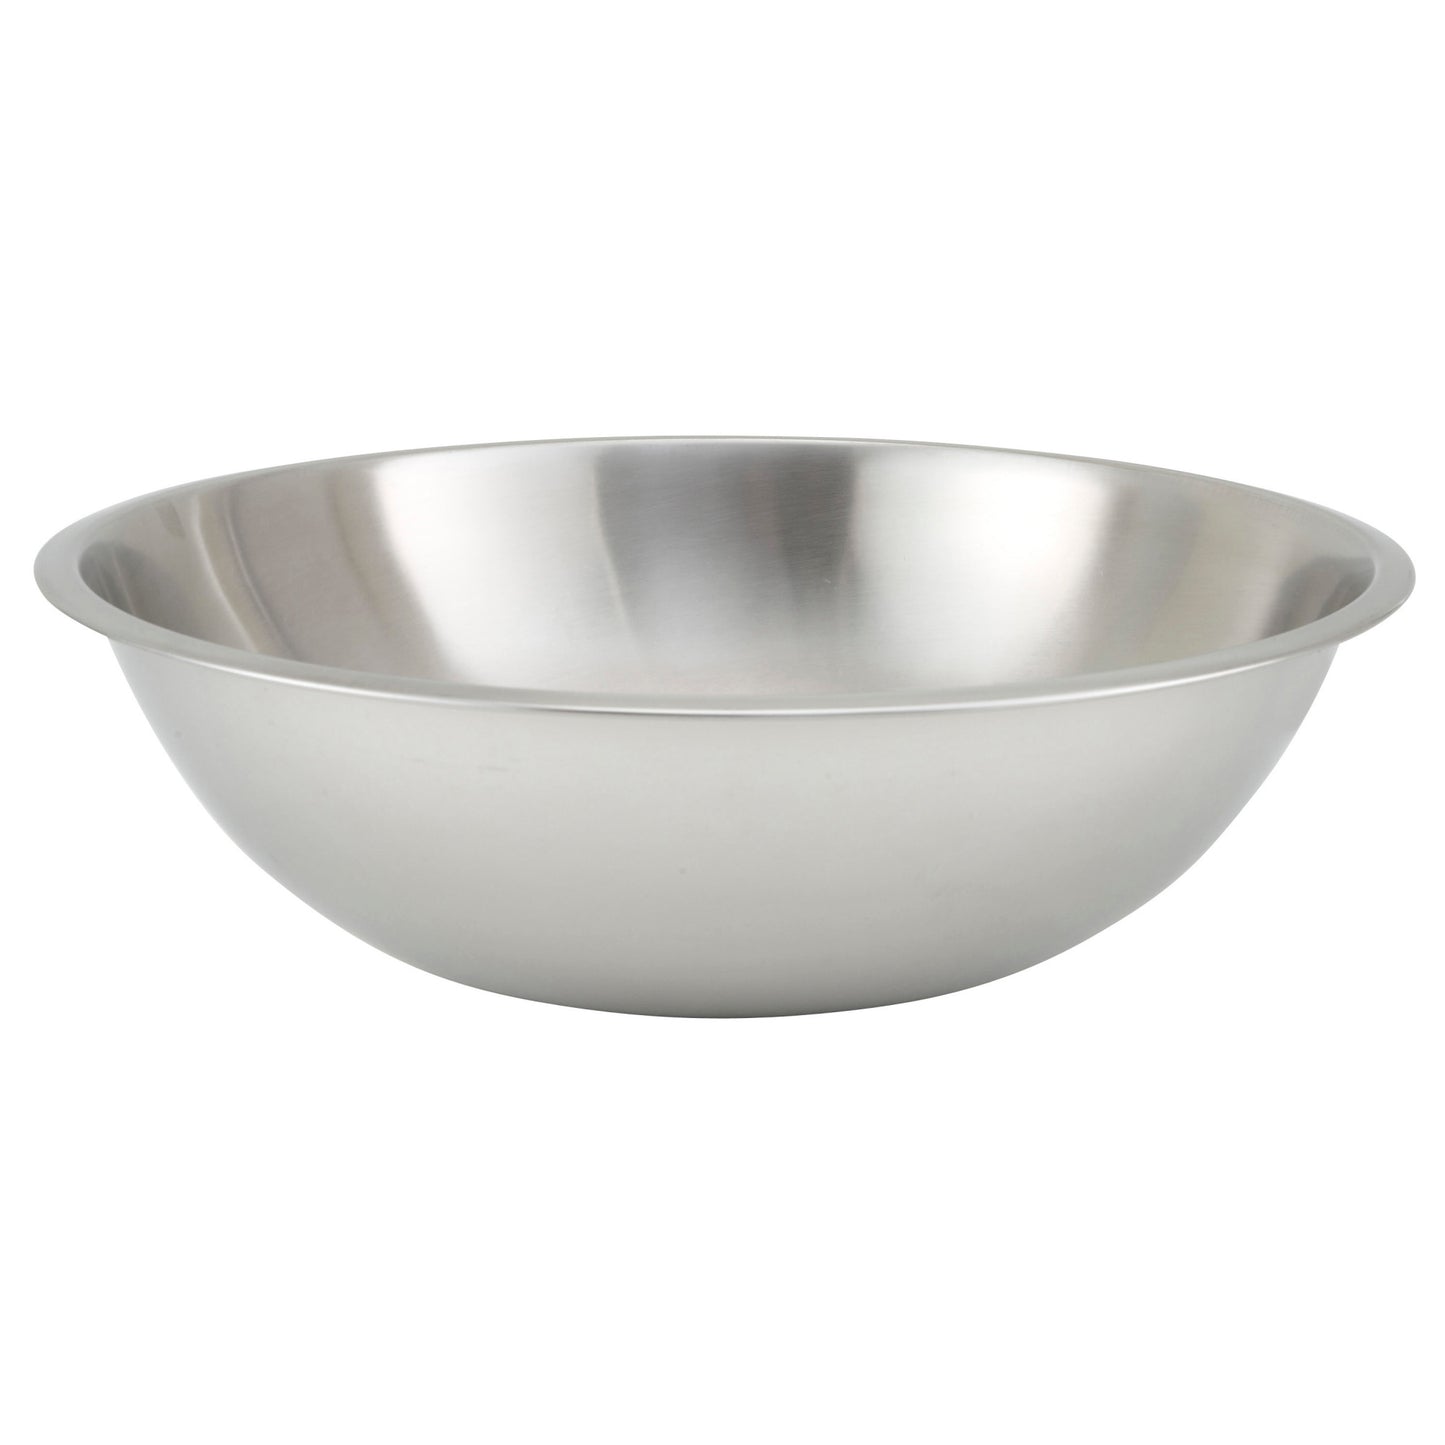 Mixing Bowl, Shallow, Heavy-Duty Stainless Steel, 0.65mm - 13 Quart